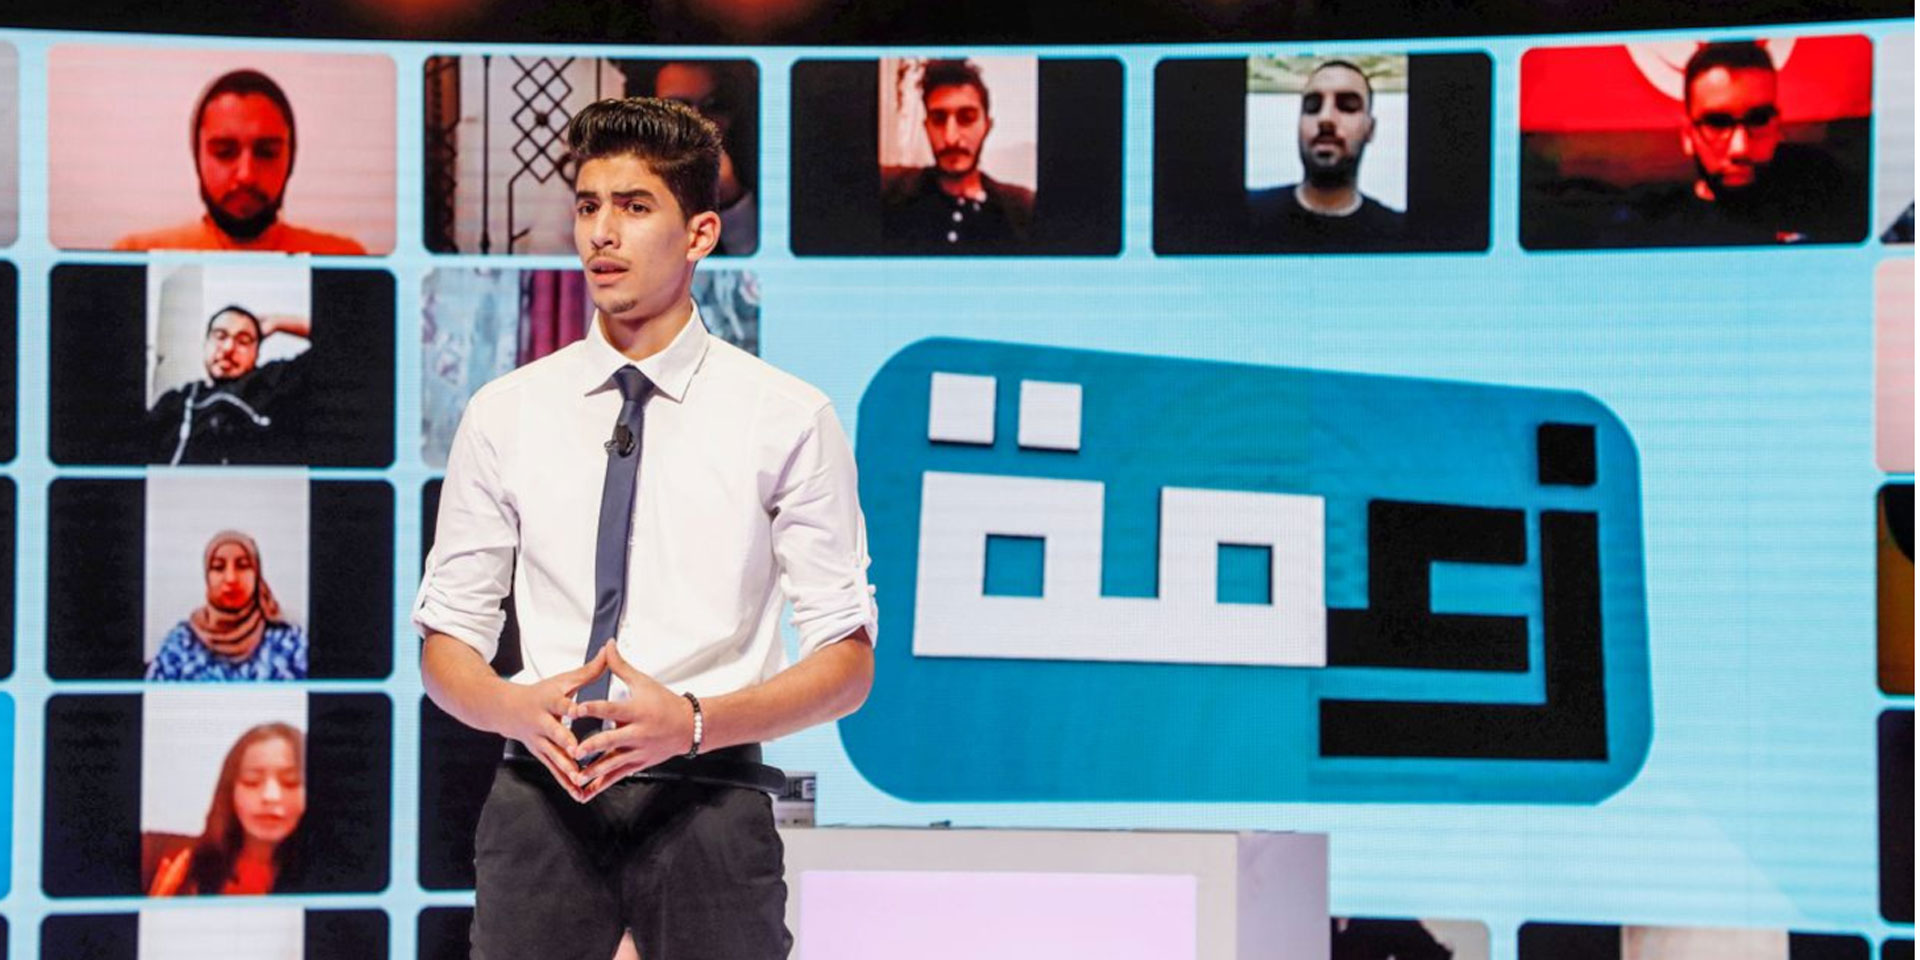 A young journalist stands in front of a giant screen and presents the news.